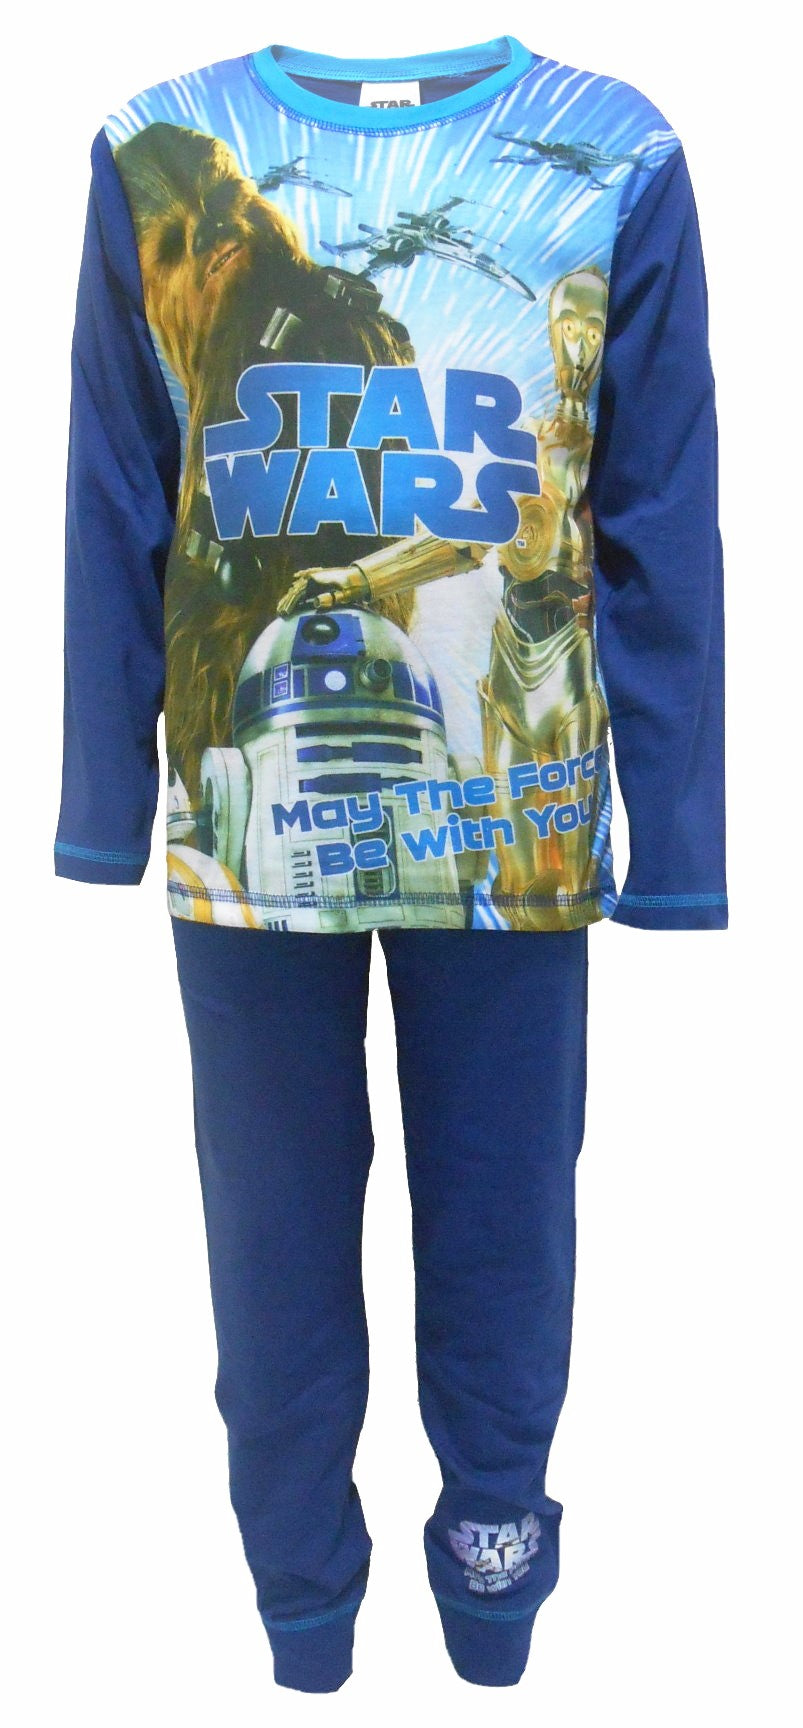 Disney Star Wars "Force Be With You" Boys Pyjamas Sizes 4-6 Years Available